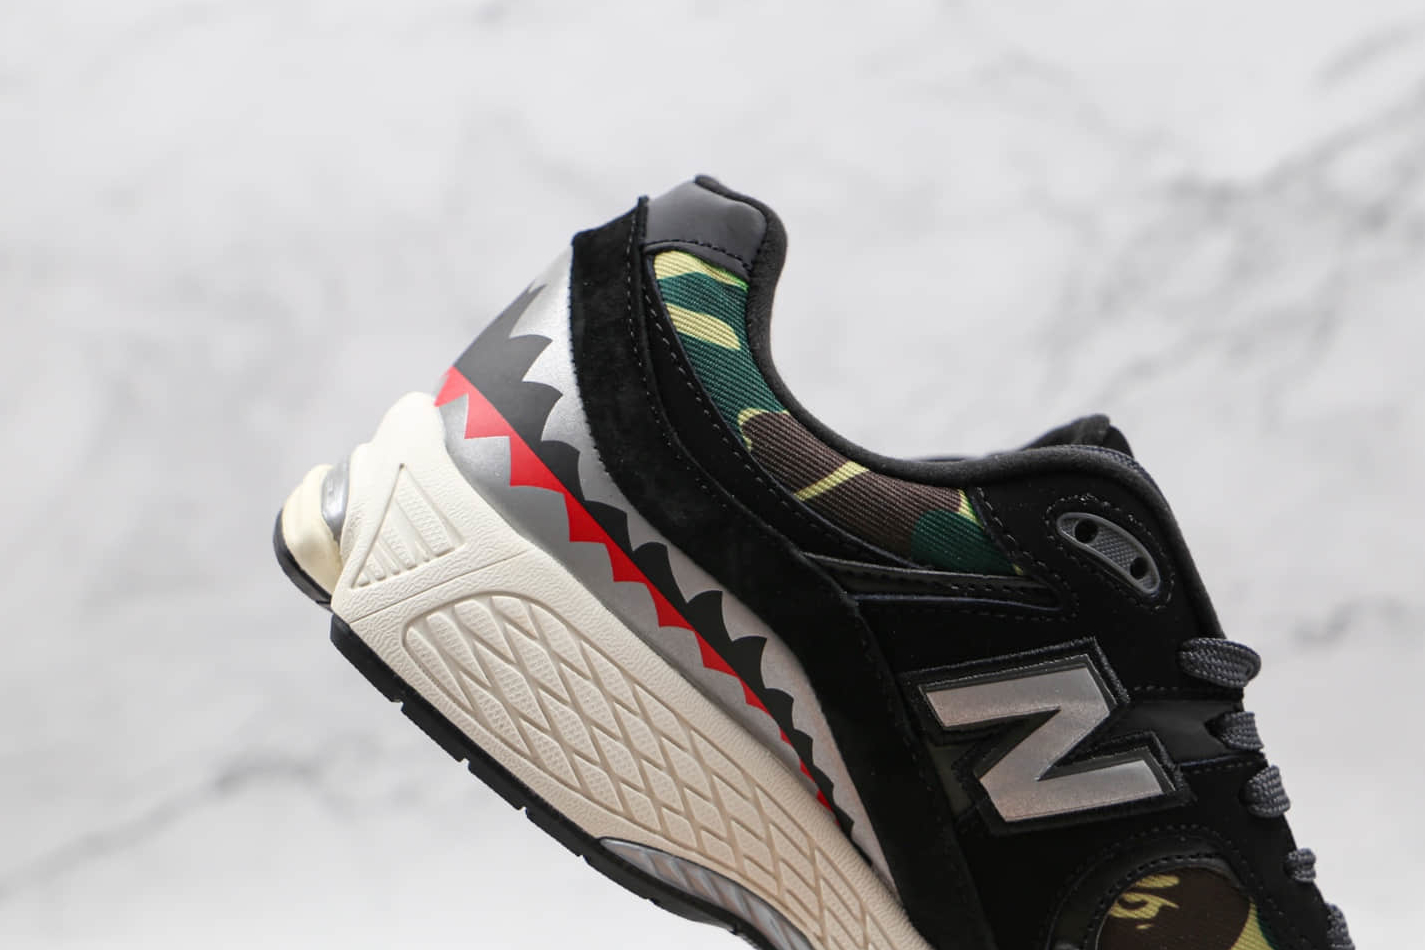 New Balance BAPE x 2002R 'Apes Together Strong - Black Camo' M2002RBF - Shop the Exclusive Collaboration